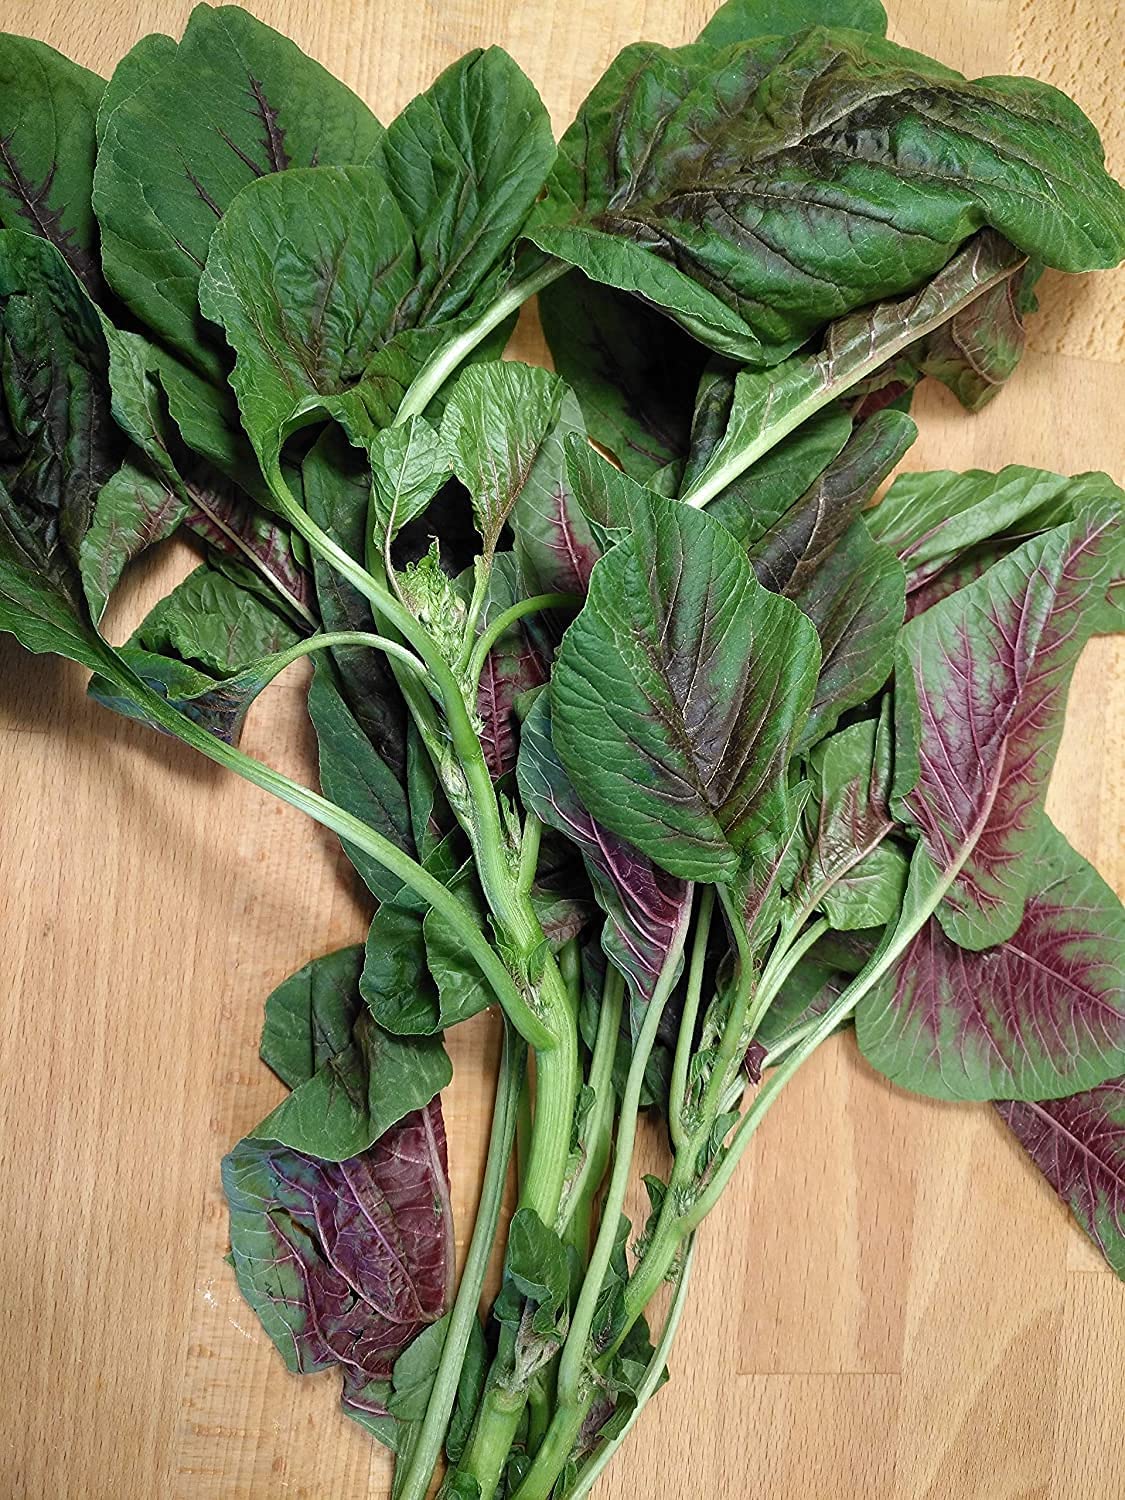 Red and Green (Red-Leaf) Amaranth 1000 Vegetable Seeds - Amaranthus Tricolor Non-GMO Heirloom Calaloo, Yin Choi, Xian CAI or Chinese Spinach, Tender Salad Greens